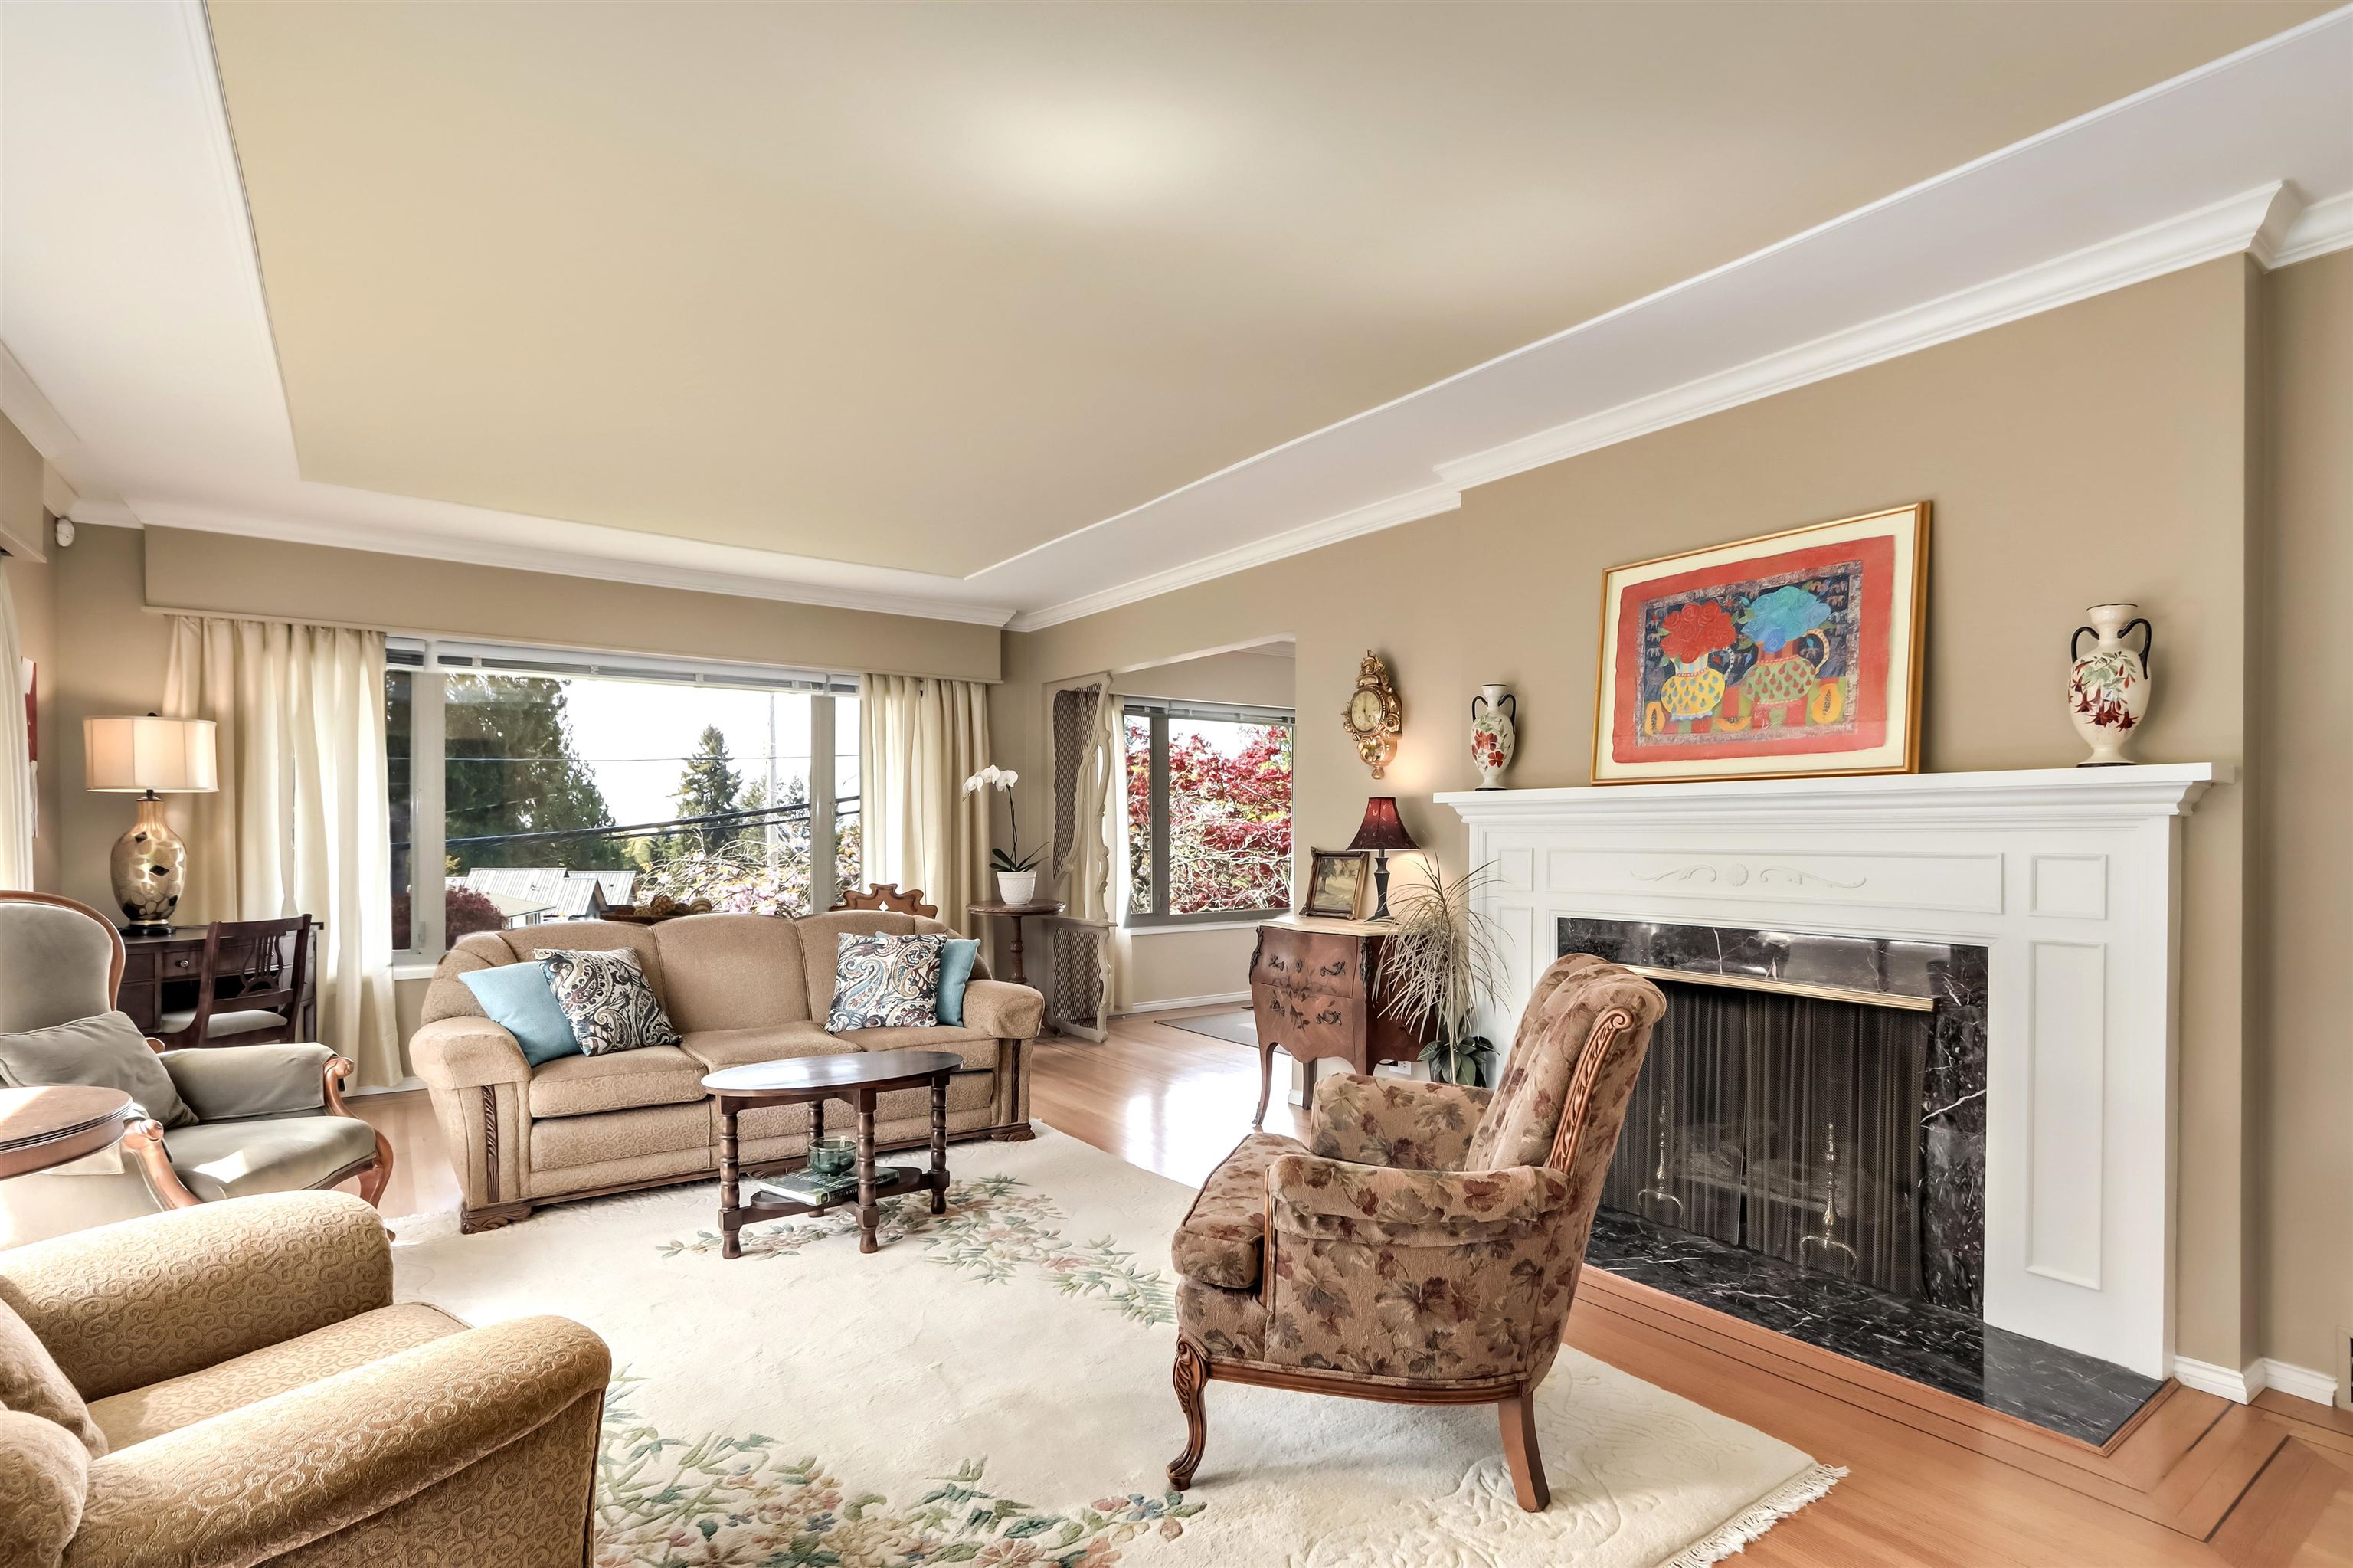 Listing image of 3825 GLENVIEW CRESCENT